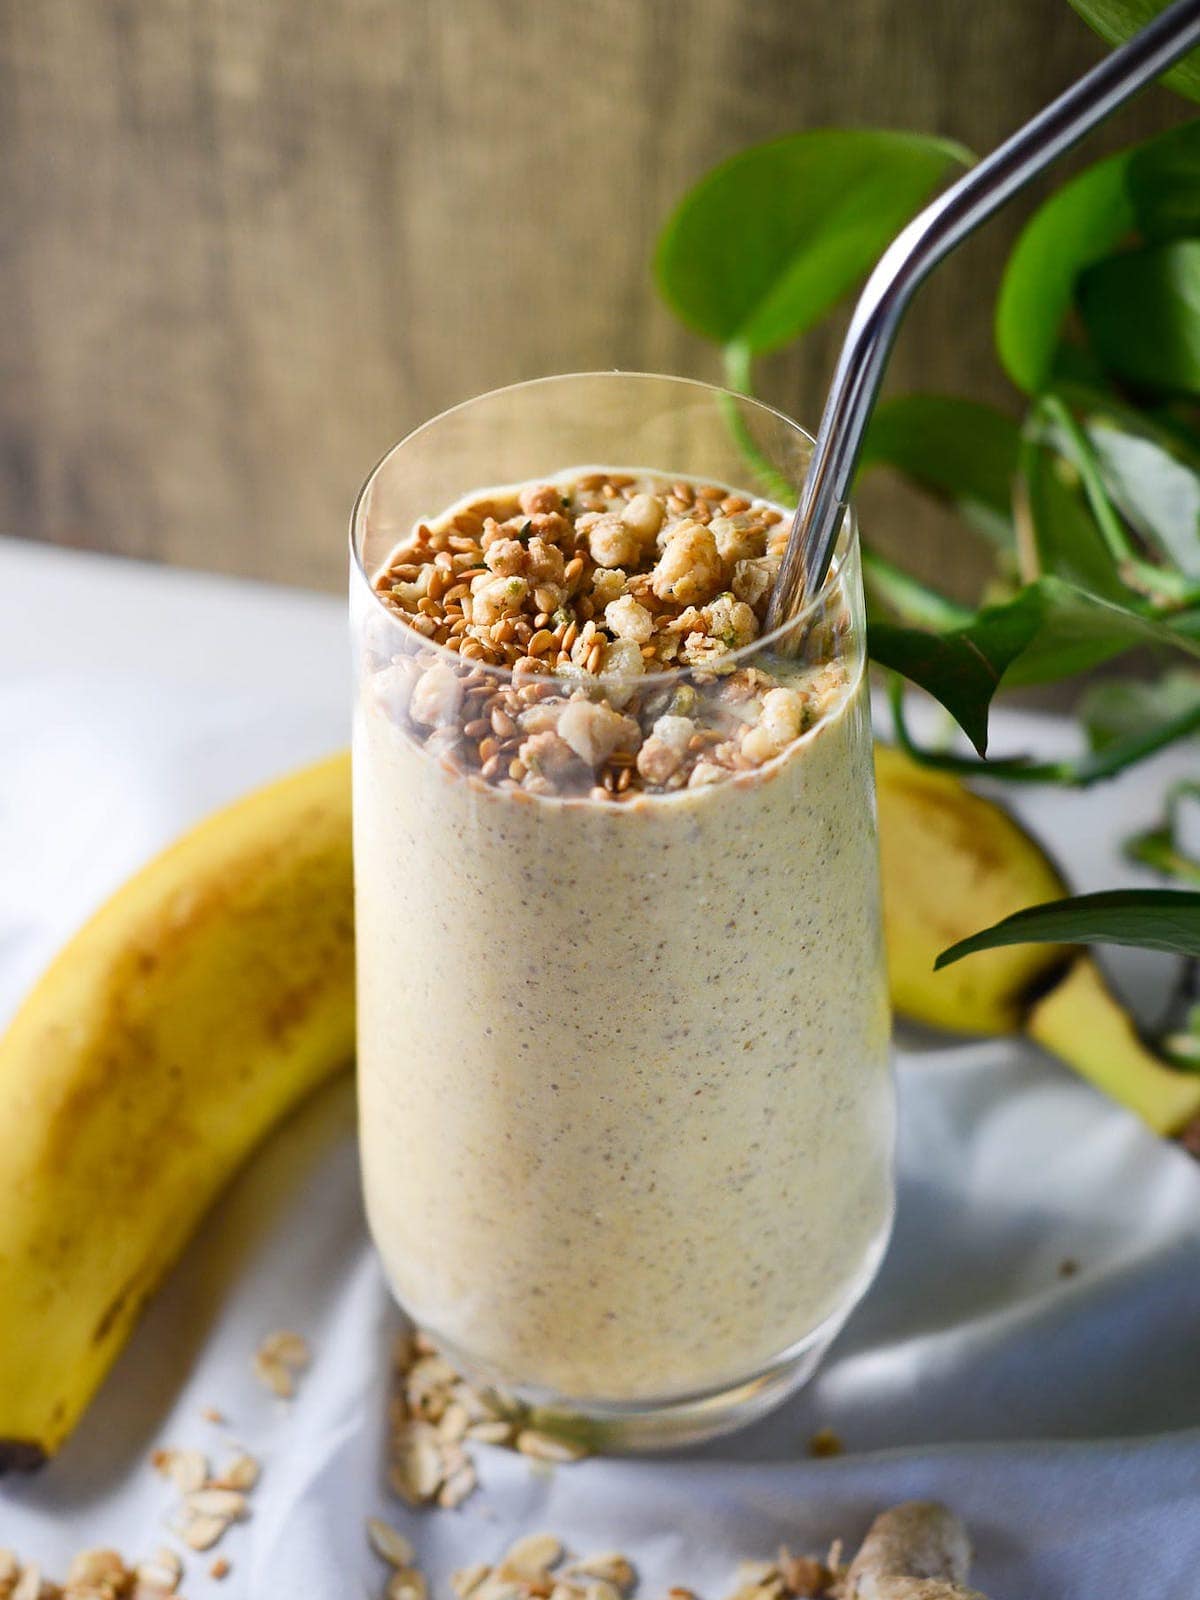 This is a photo of a gut health smoothie with banana and oats.